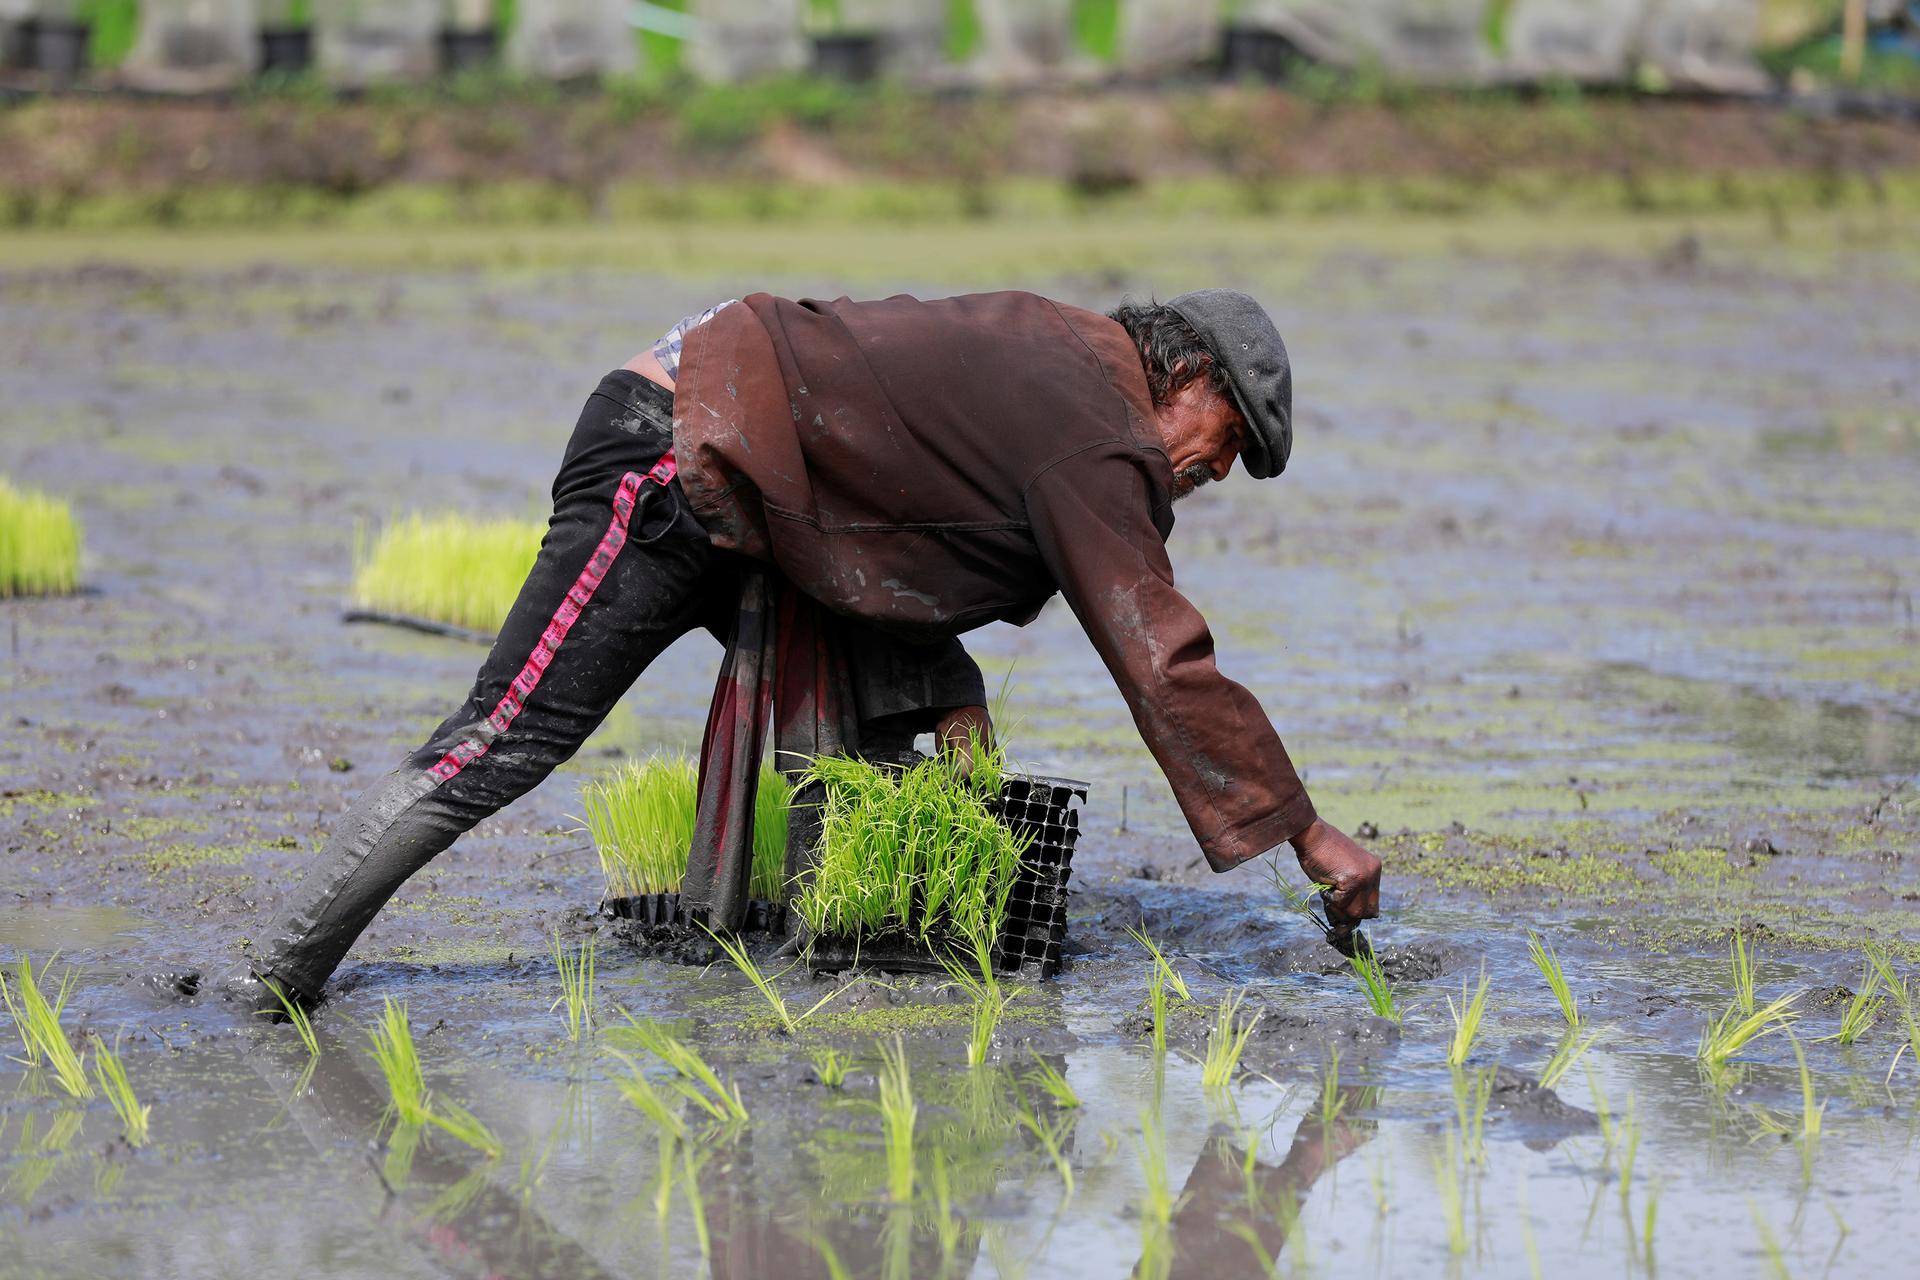 Asia Rice-Firm rupee lifts Indian rates; Vietnam prices hold near 12-year low